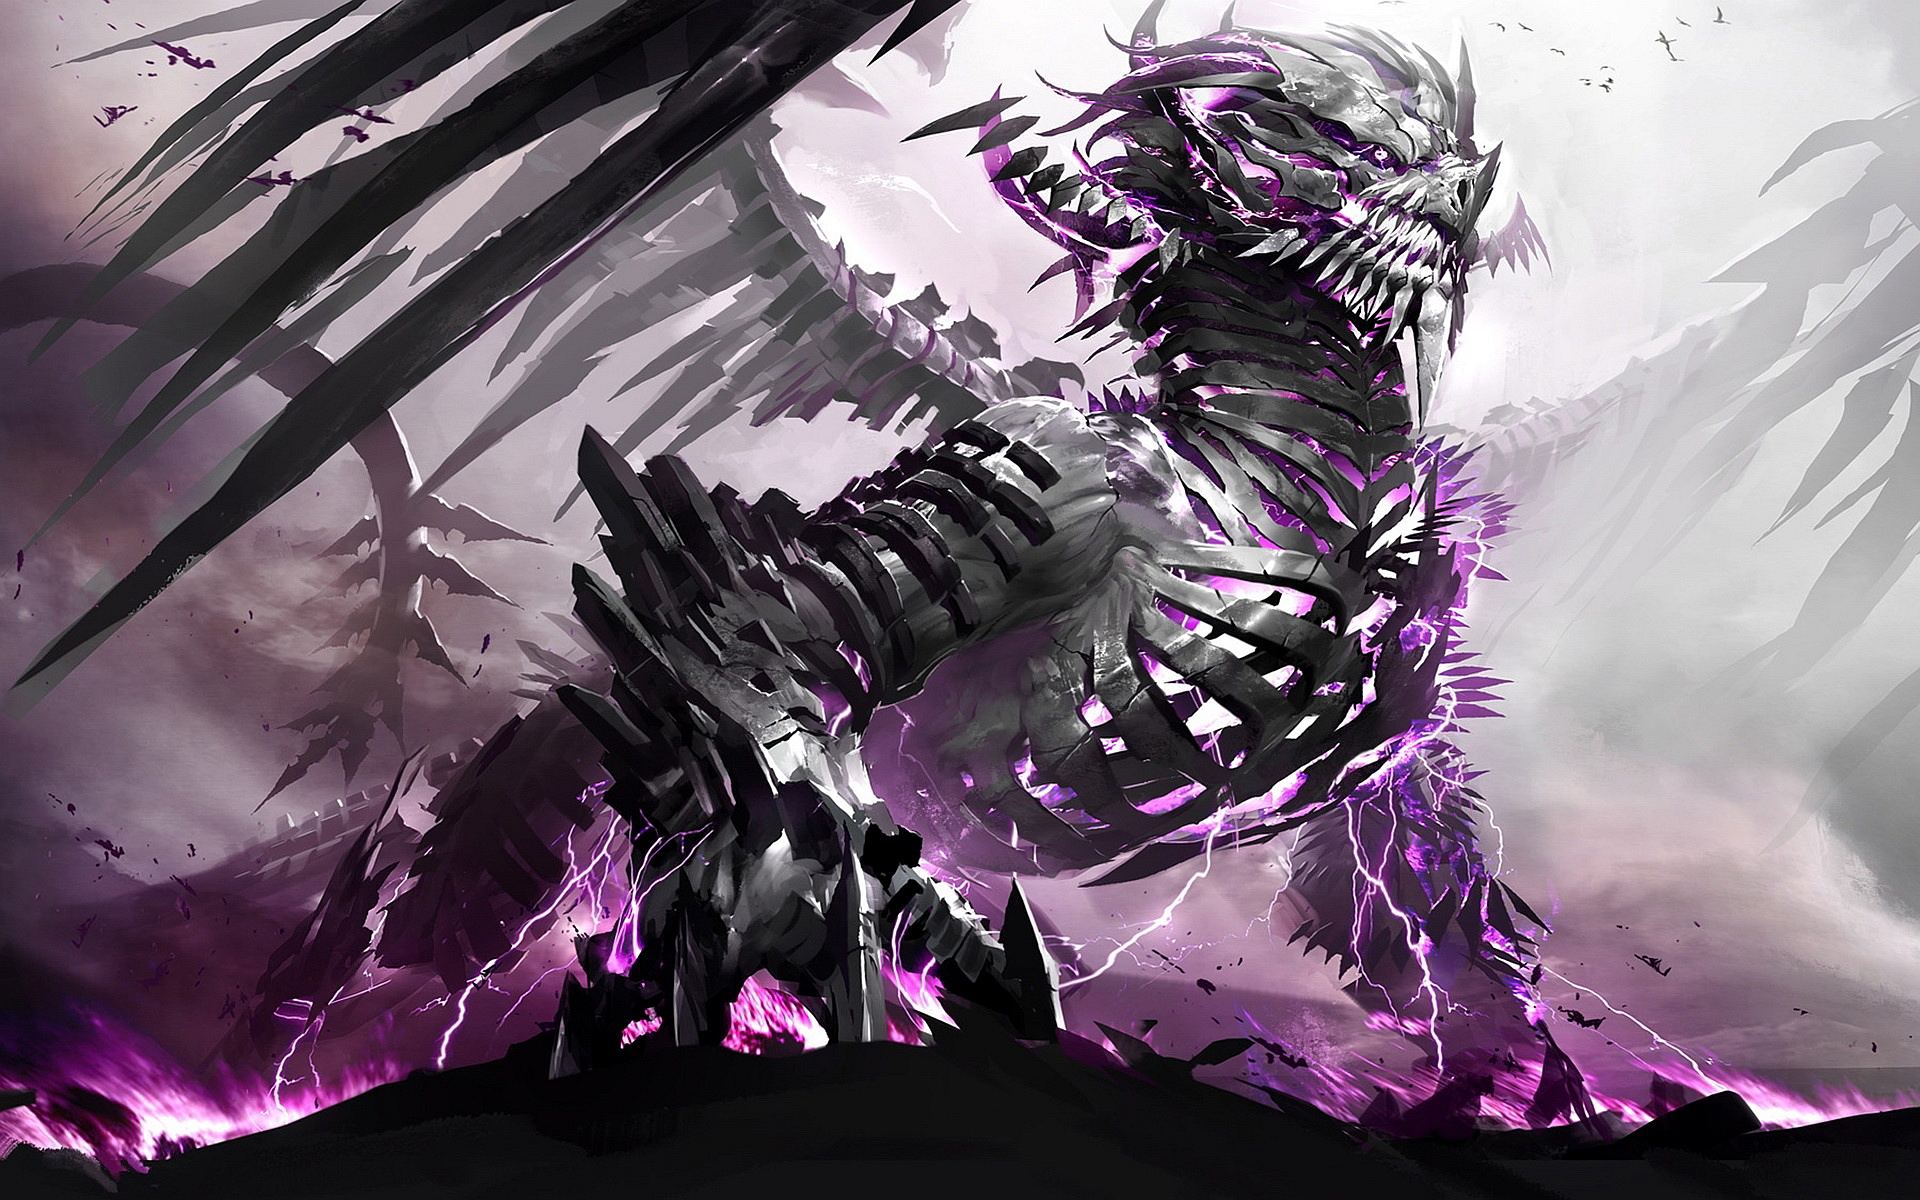 Coolest Dragon Wallpapers   Dragon City Guide 1920x1200